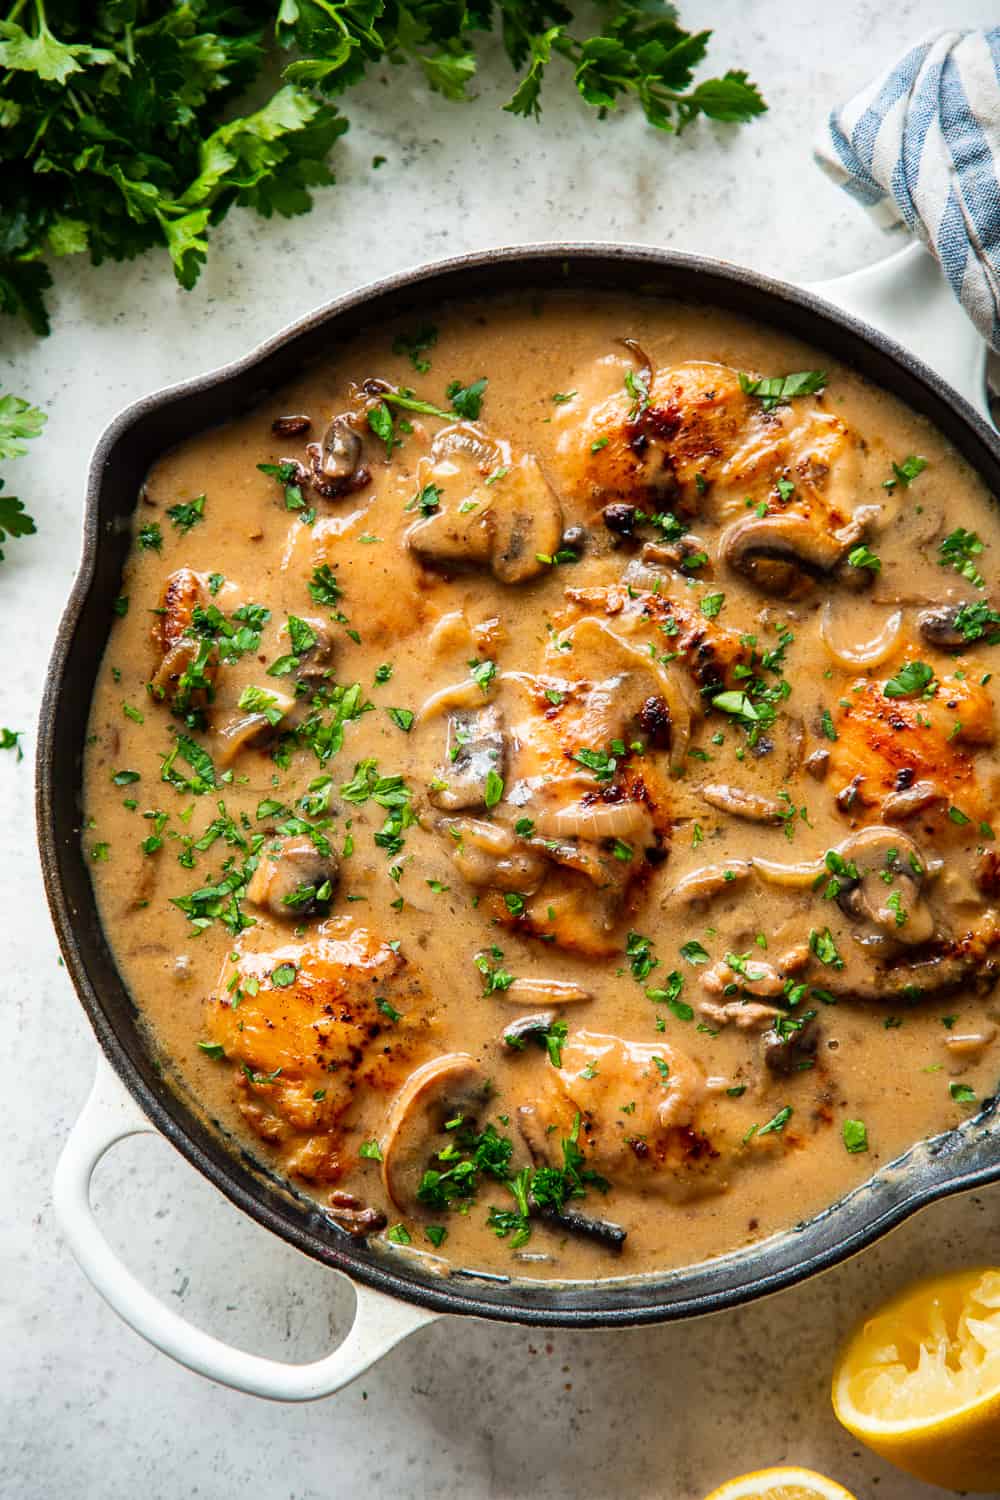 This hearty and savory paleo chicken stroganoff is made all in one skillet for a quick, delicious and cozy weeknight meal.  It’s Whole30, low carb and keto and delicious served over sautéed cauliflower rice, your favorite veggie noodles or roasted veggies. #paleo #whole30 #keto #lowcarb #cleaneating 